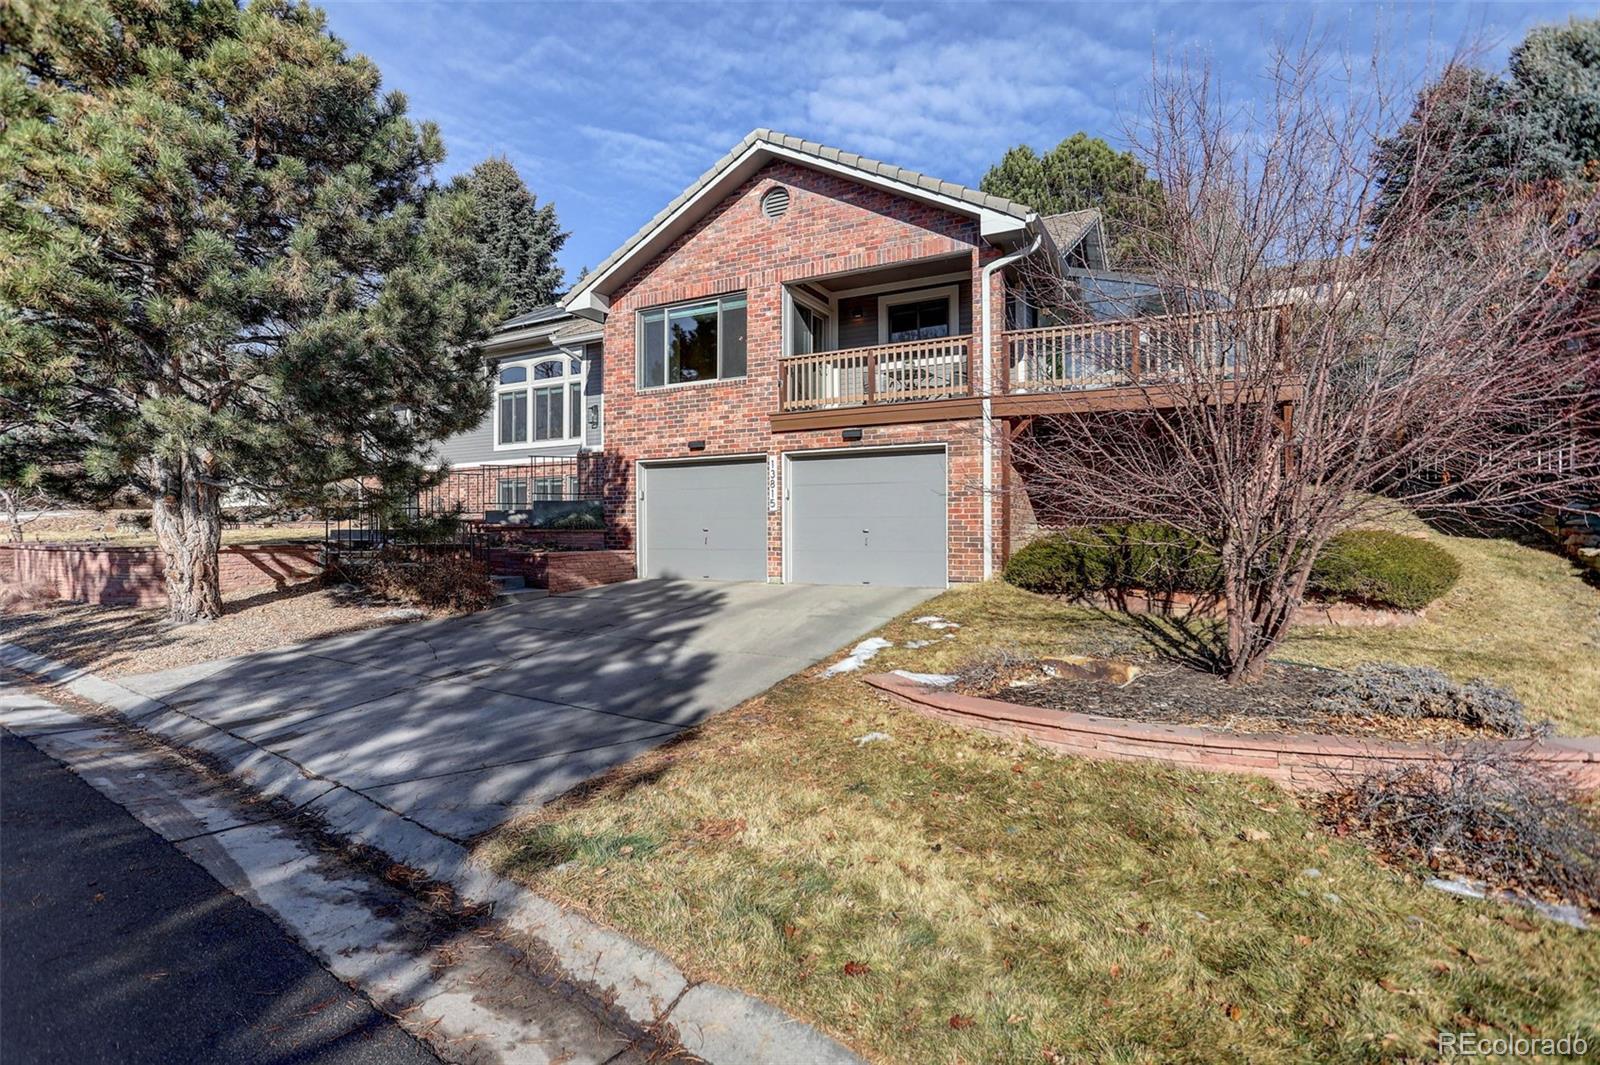 13815 w 58th drive, Arvada sold home. Closed on 2024-03-01 for $1,050,000.